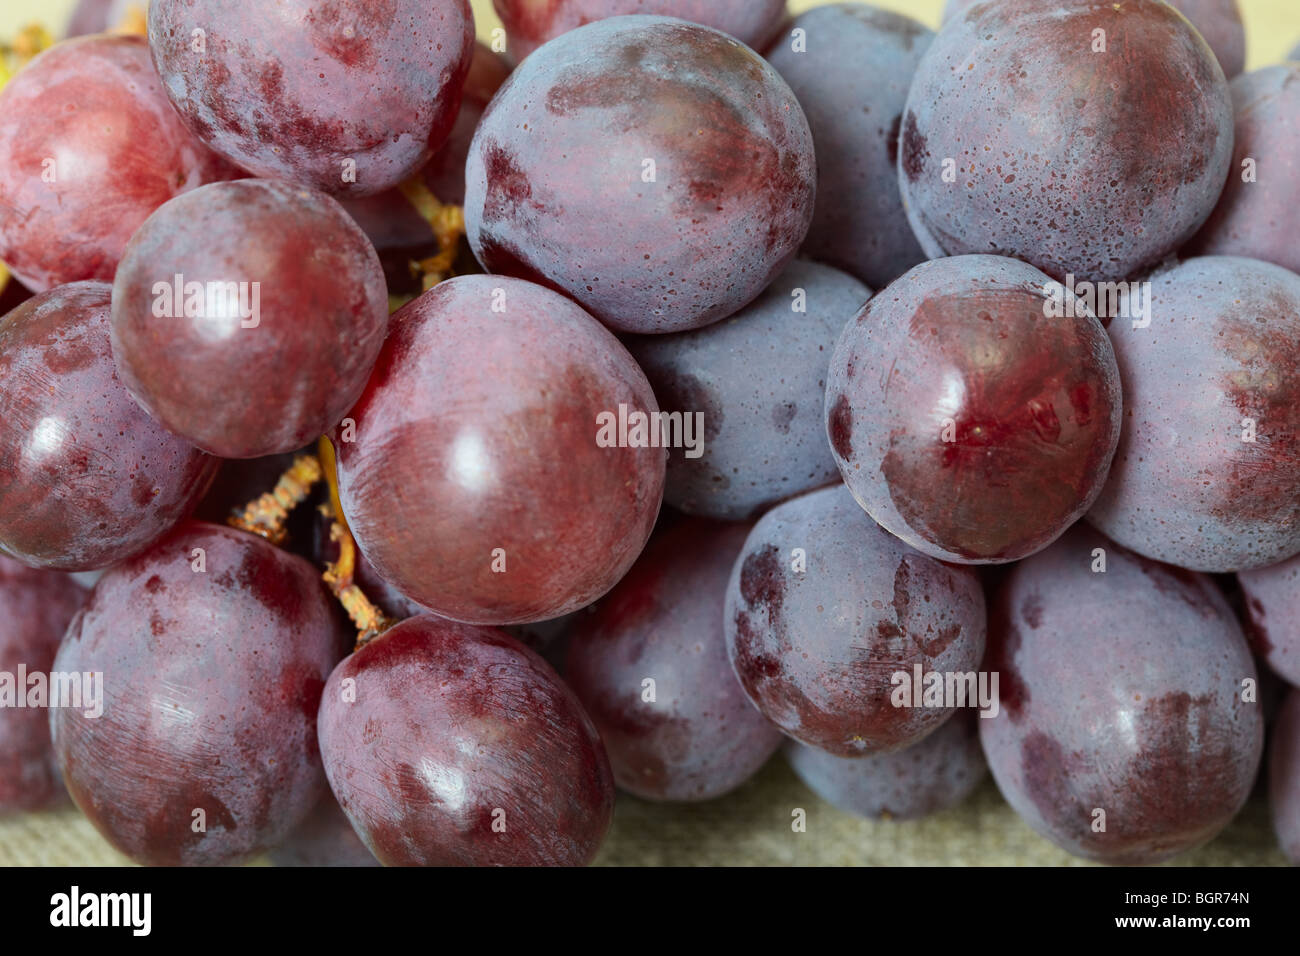 Cluster of red ripe grapes close up Stock Photo